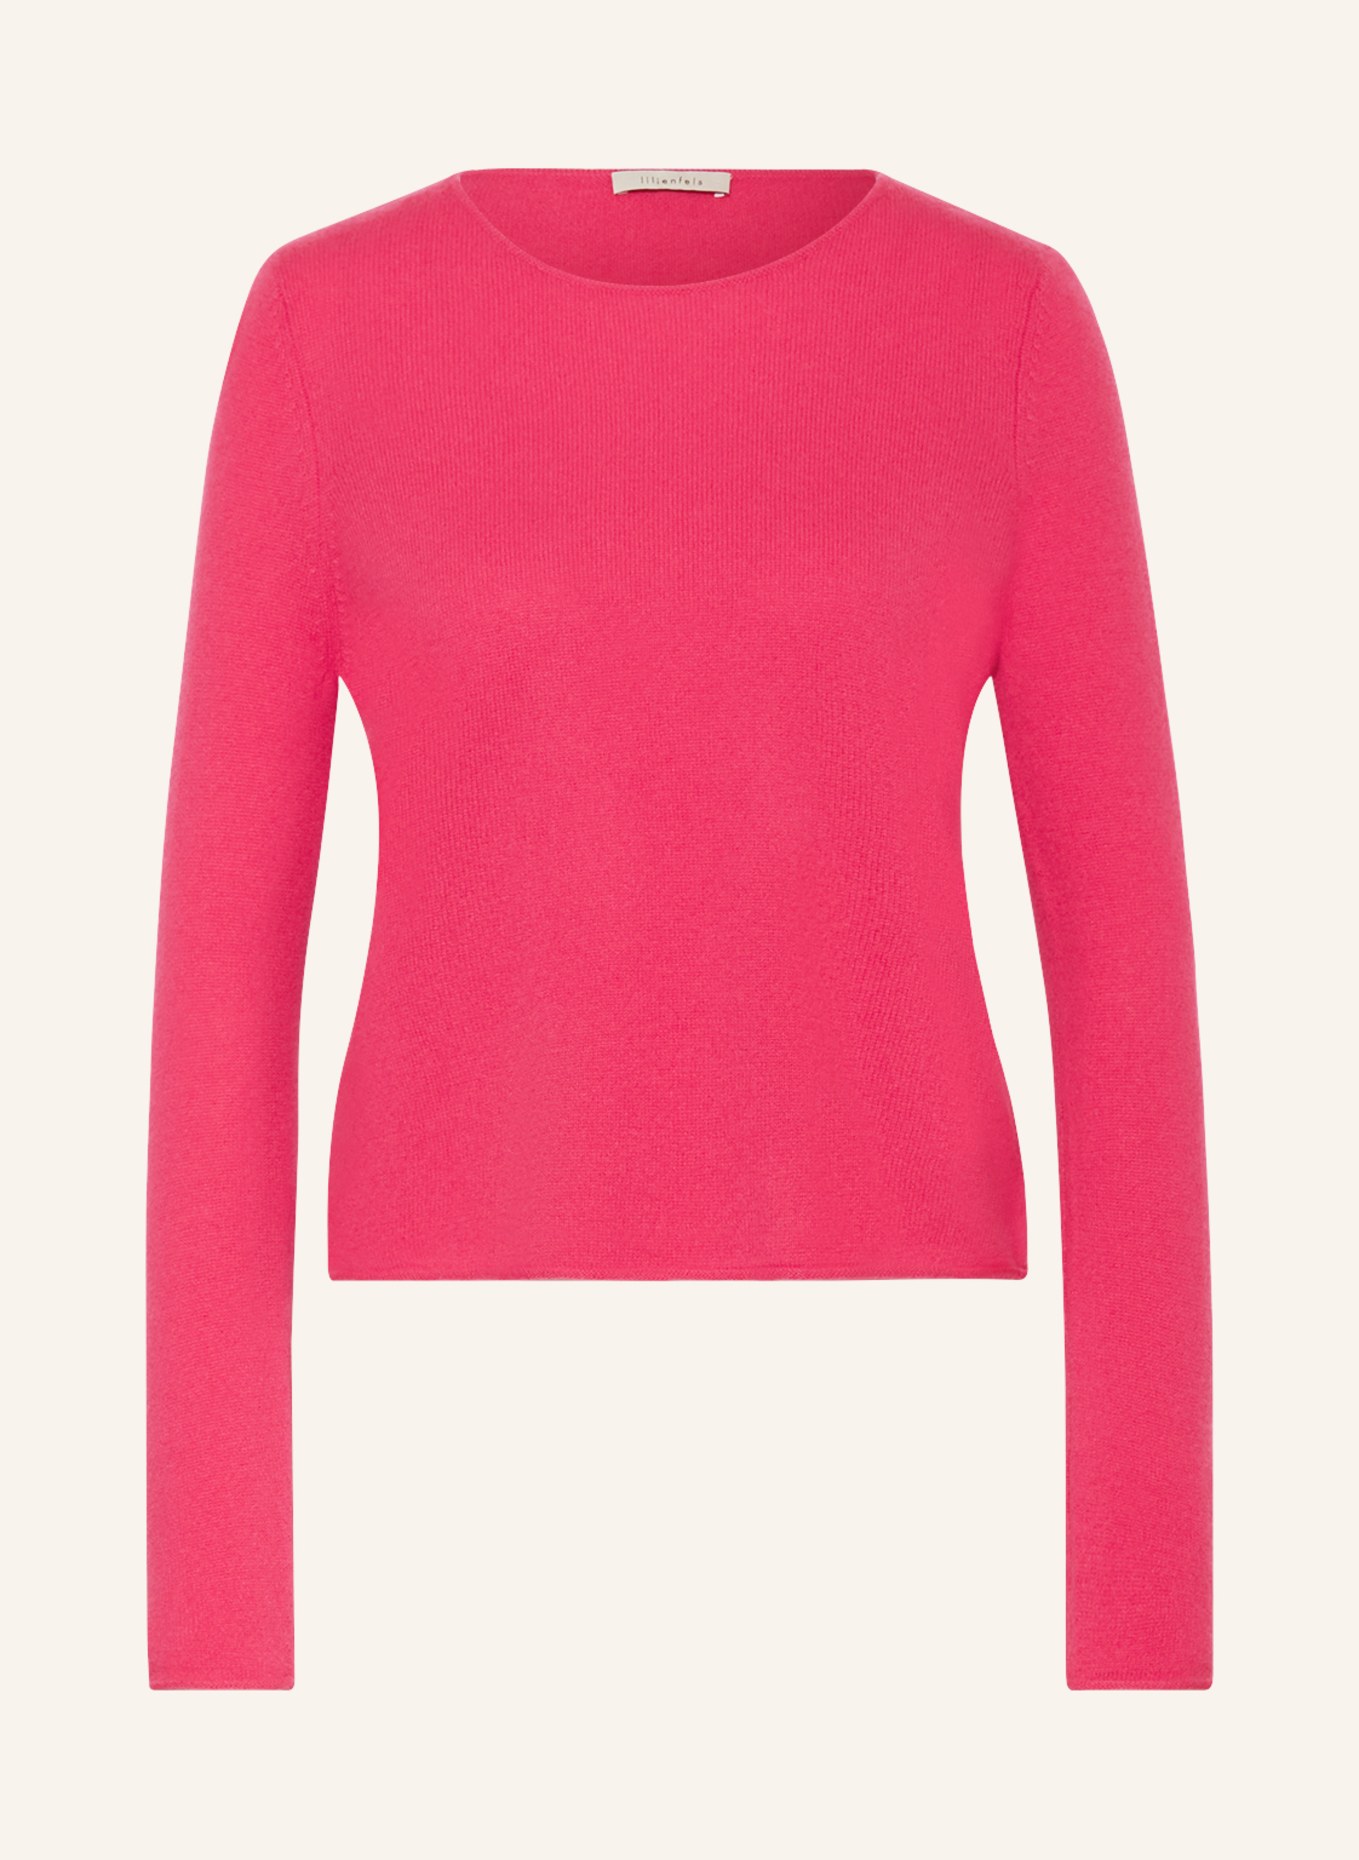 lilienfels Cashmere-Pullover , Farbe: PINK (Bild 1)